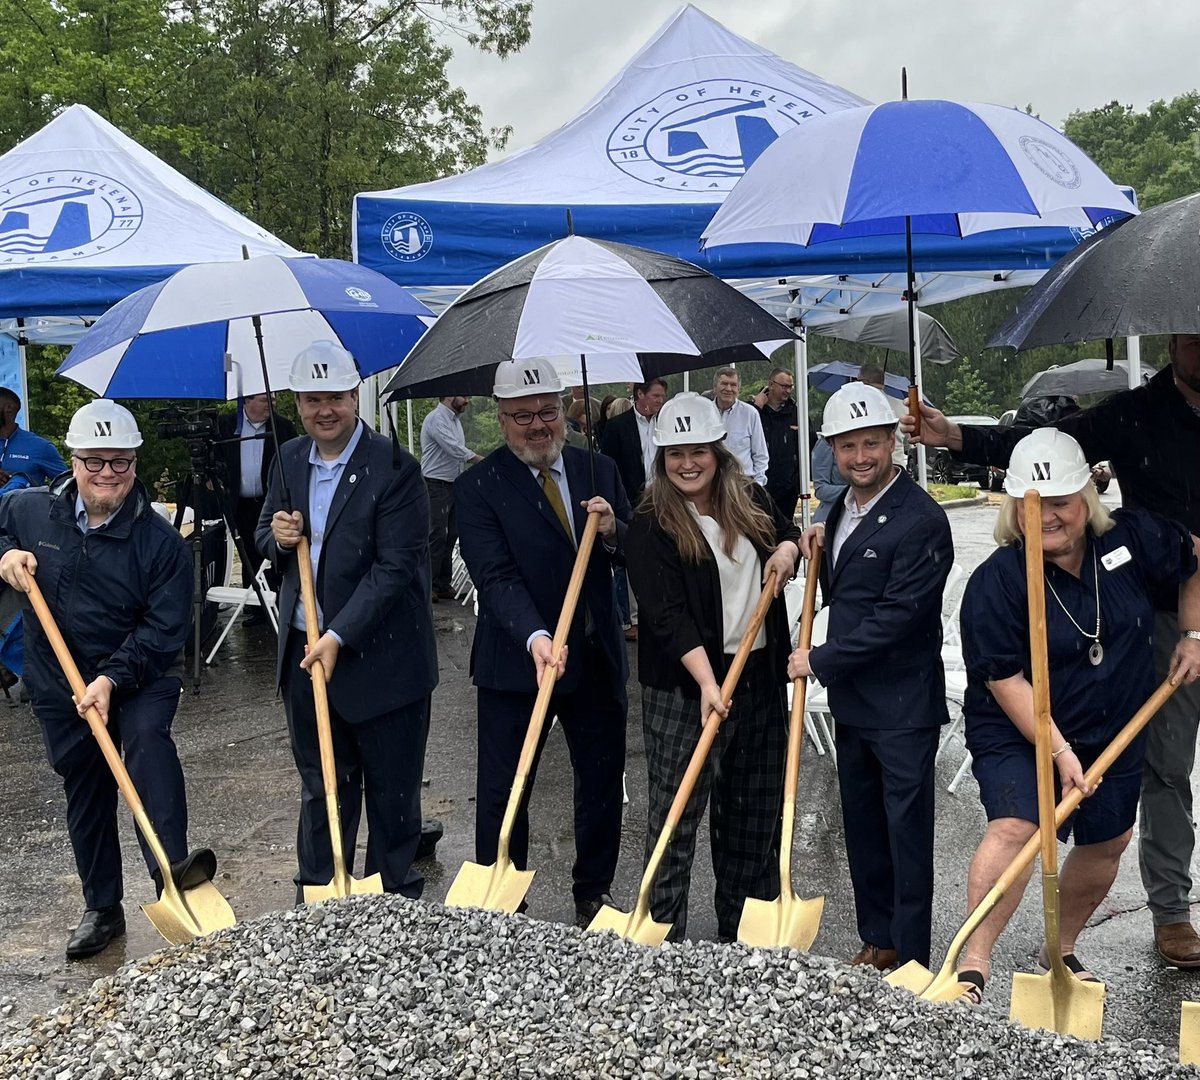 Rain didn’t dampen the excitement during today’s Helena City Hall groundbreaking! This forward thinking, growth minded, mixed-use development will serve Helena for decades to come. #localgov #leadership #progress